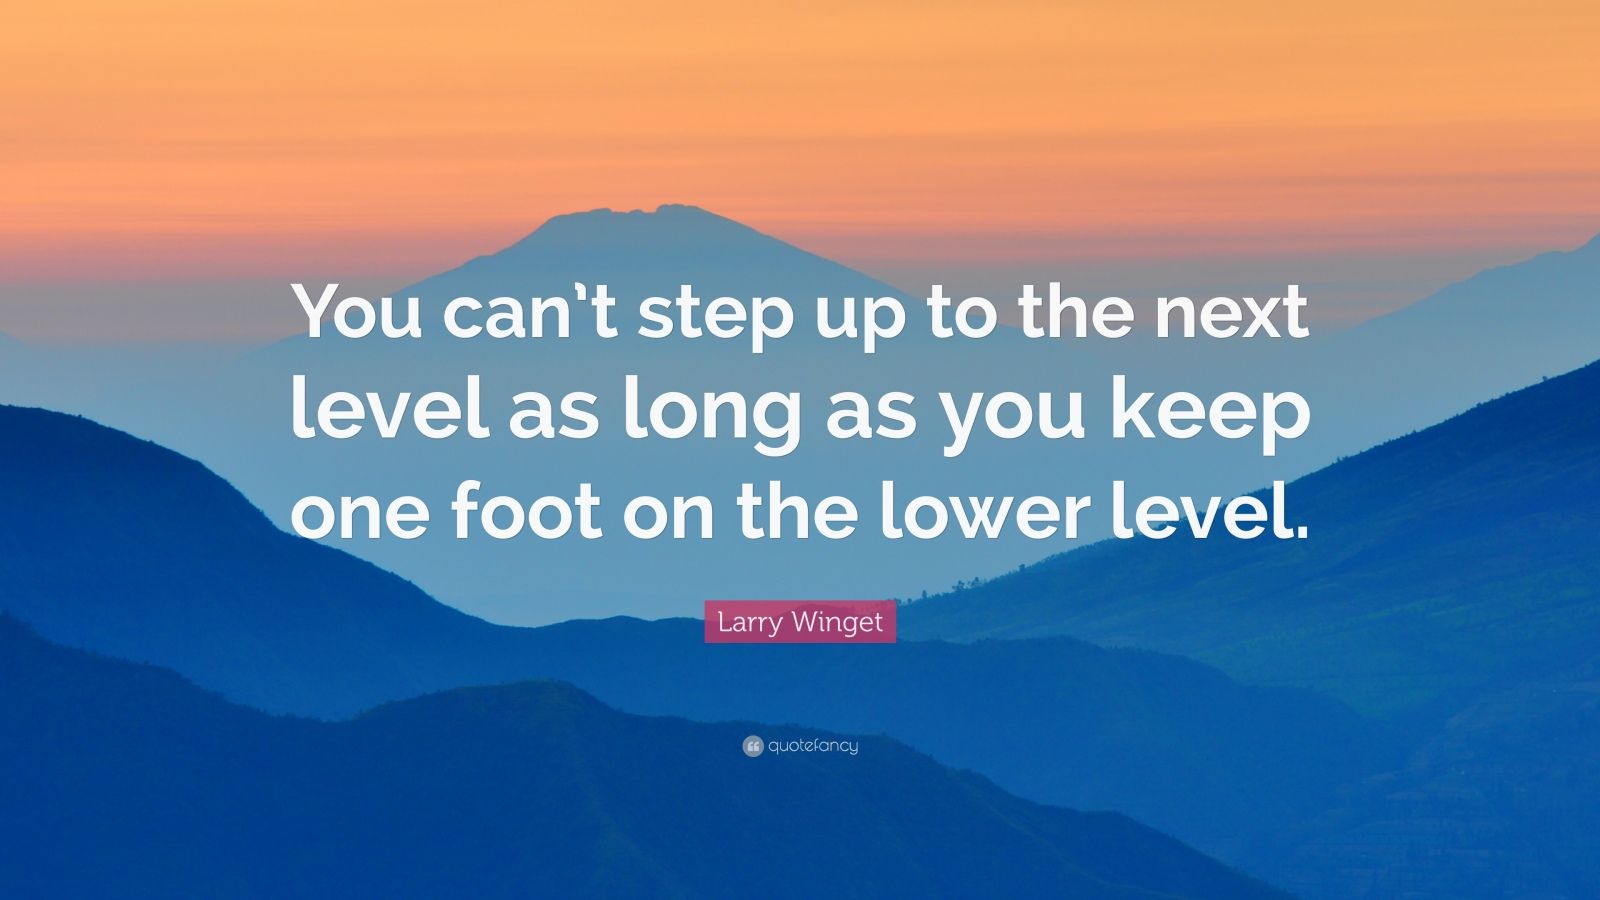 Larry Winget Quote: “You can’t step up to the next level as long as you